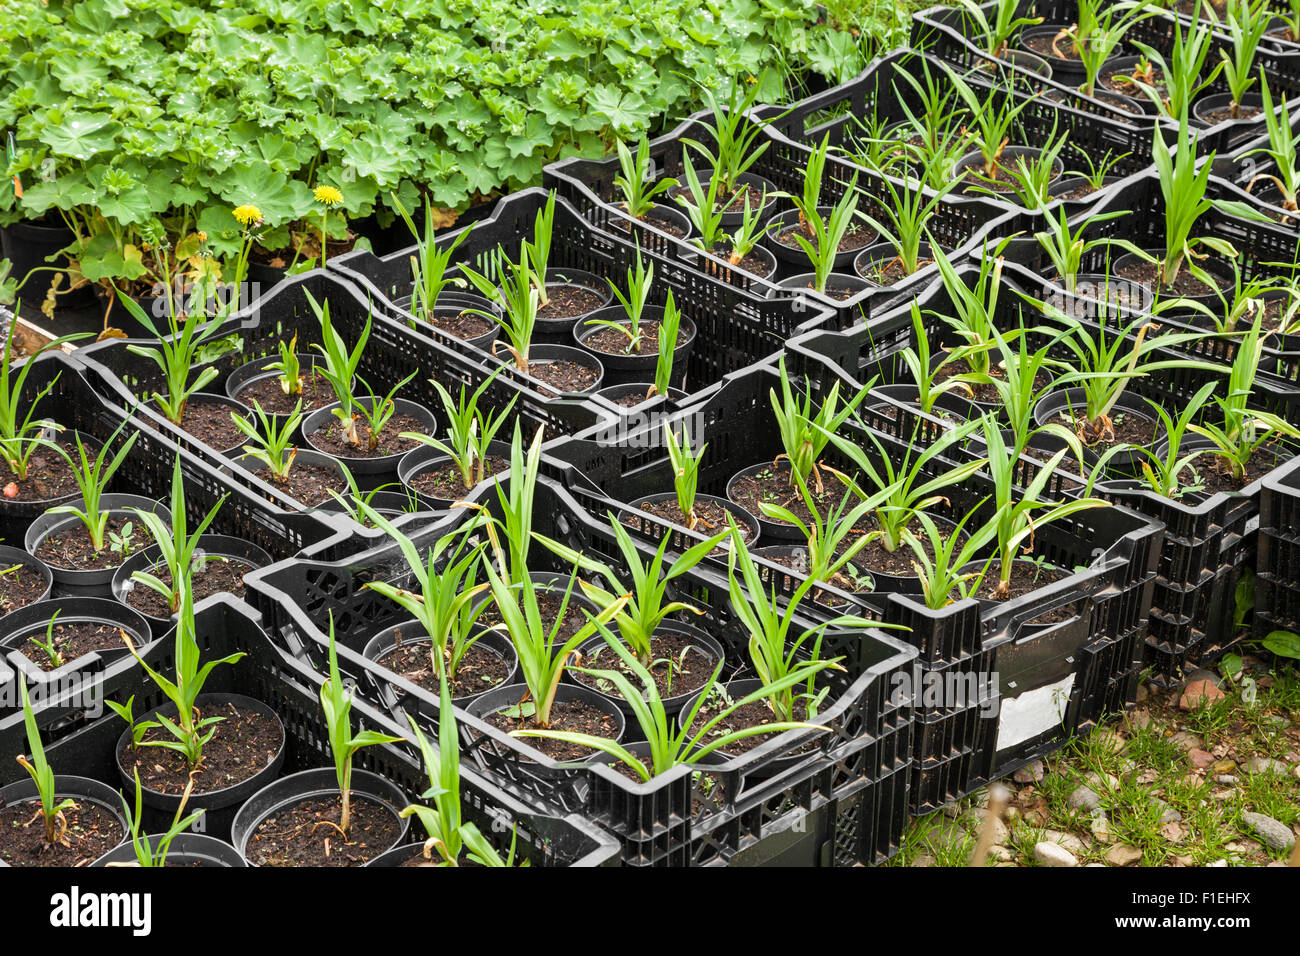 Young plants in nursery Stock Photo